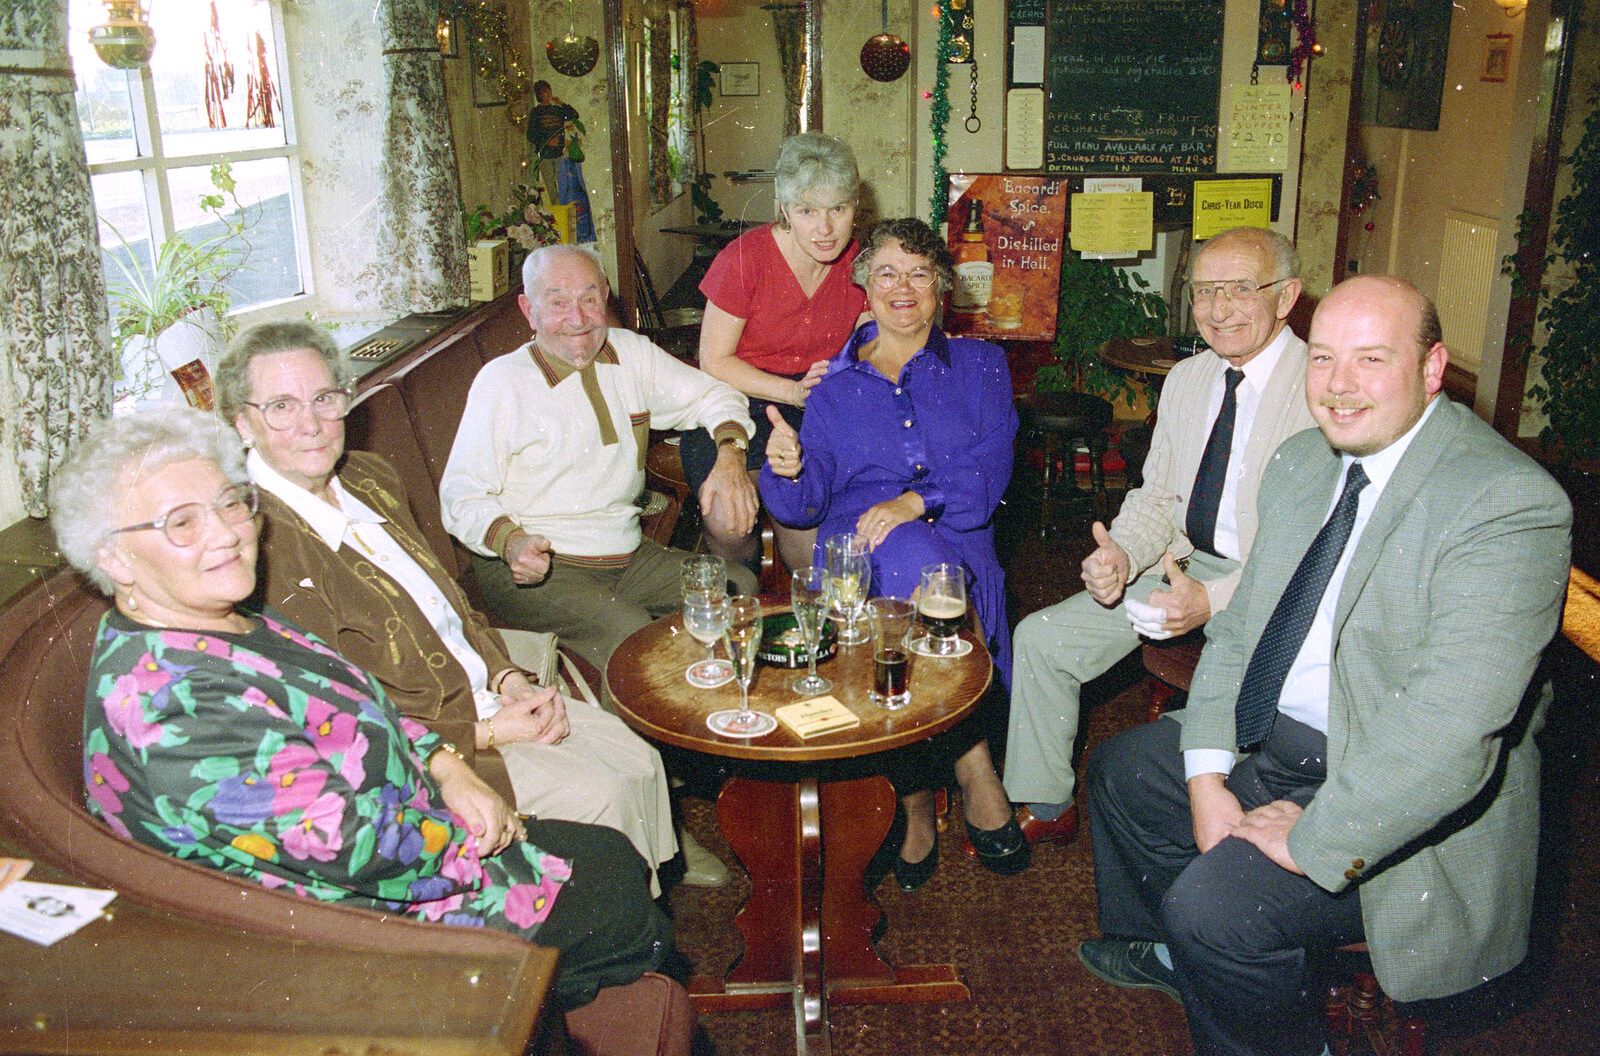 Spammy with a random group from New Year's Eve in the Swan Inn, Brome, Suffolk - 31st December 1995